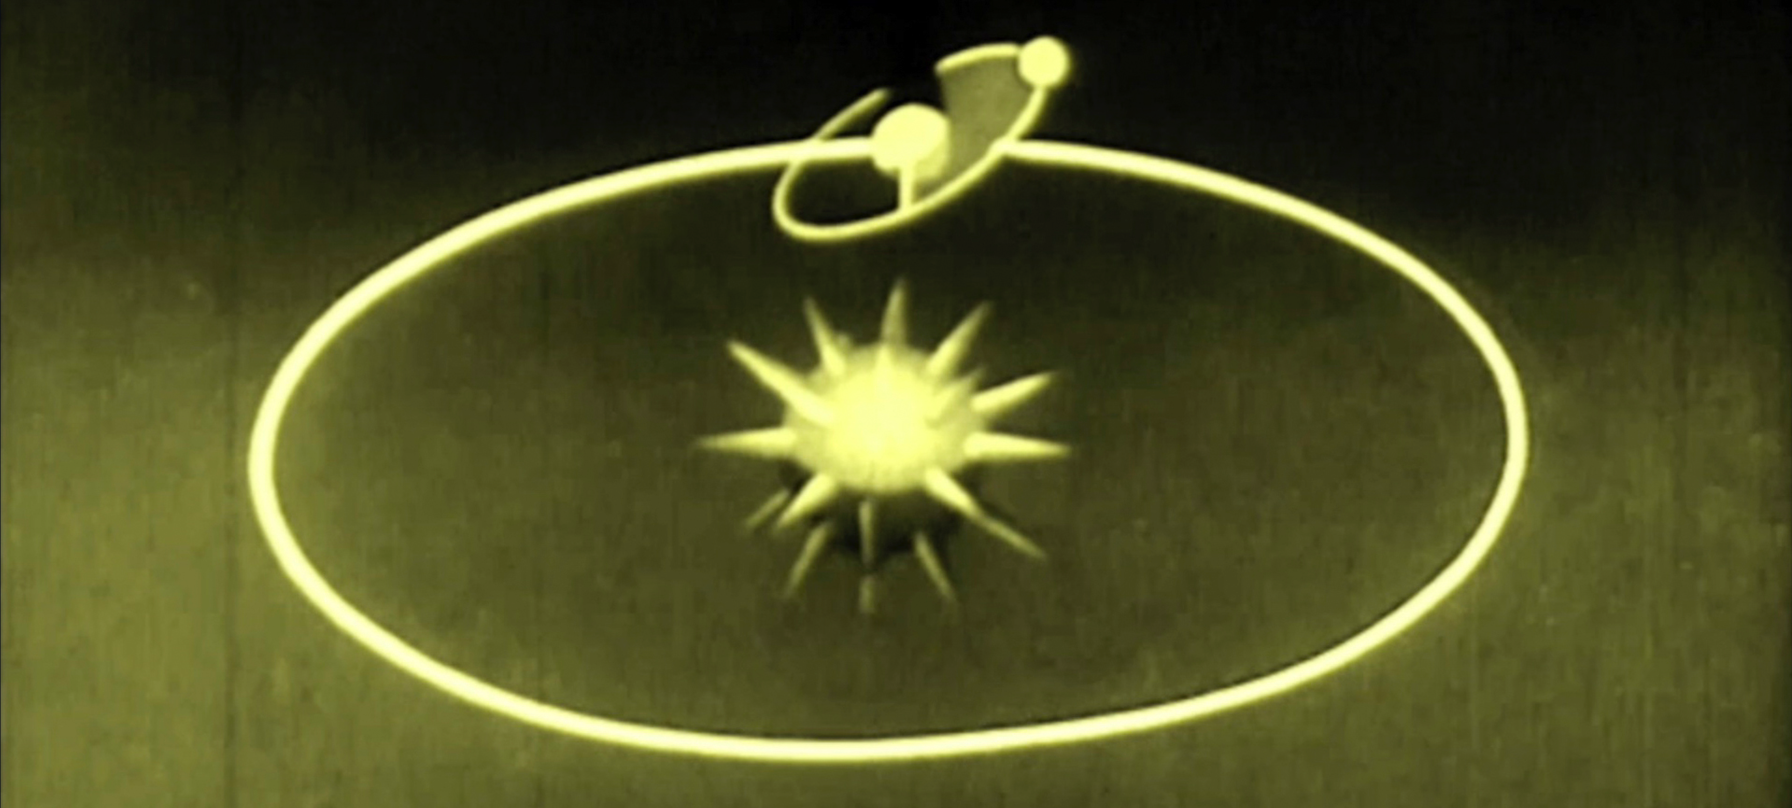 A still picture from short film Science of Sun Eating, by Gail Priest.